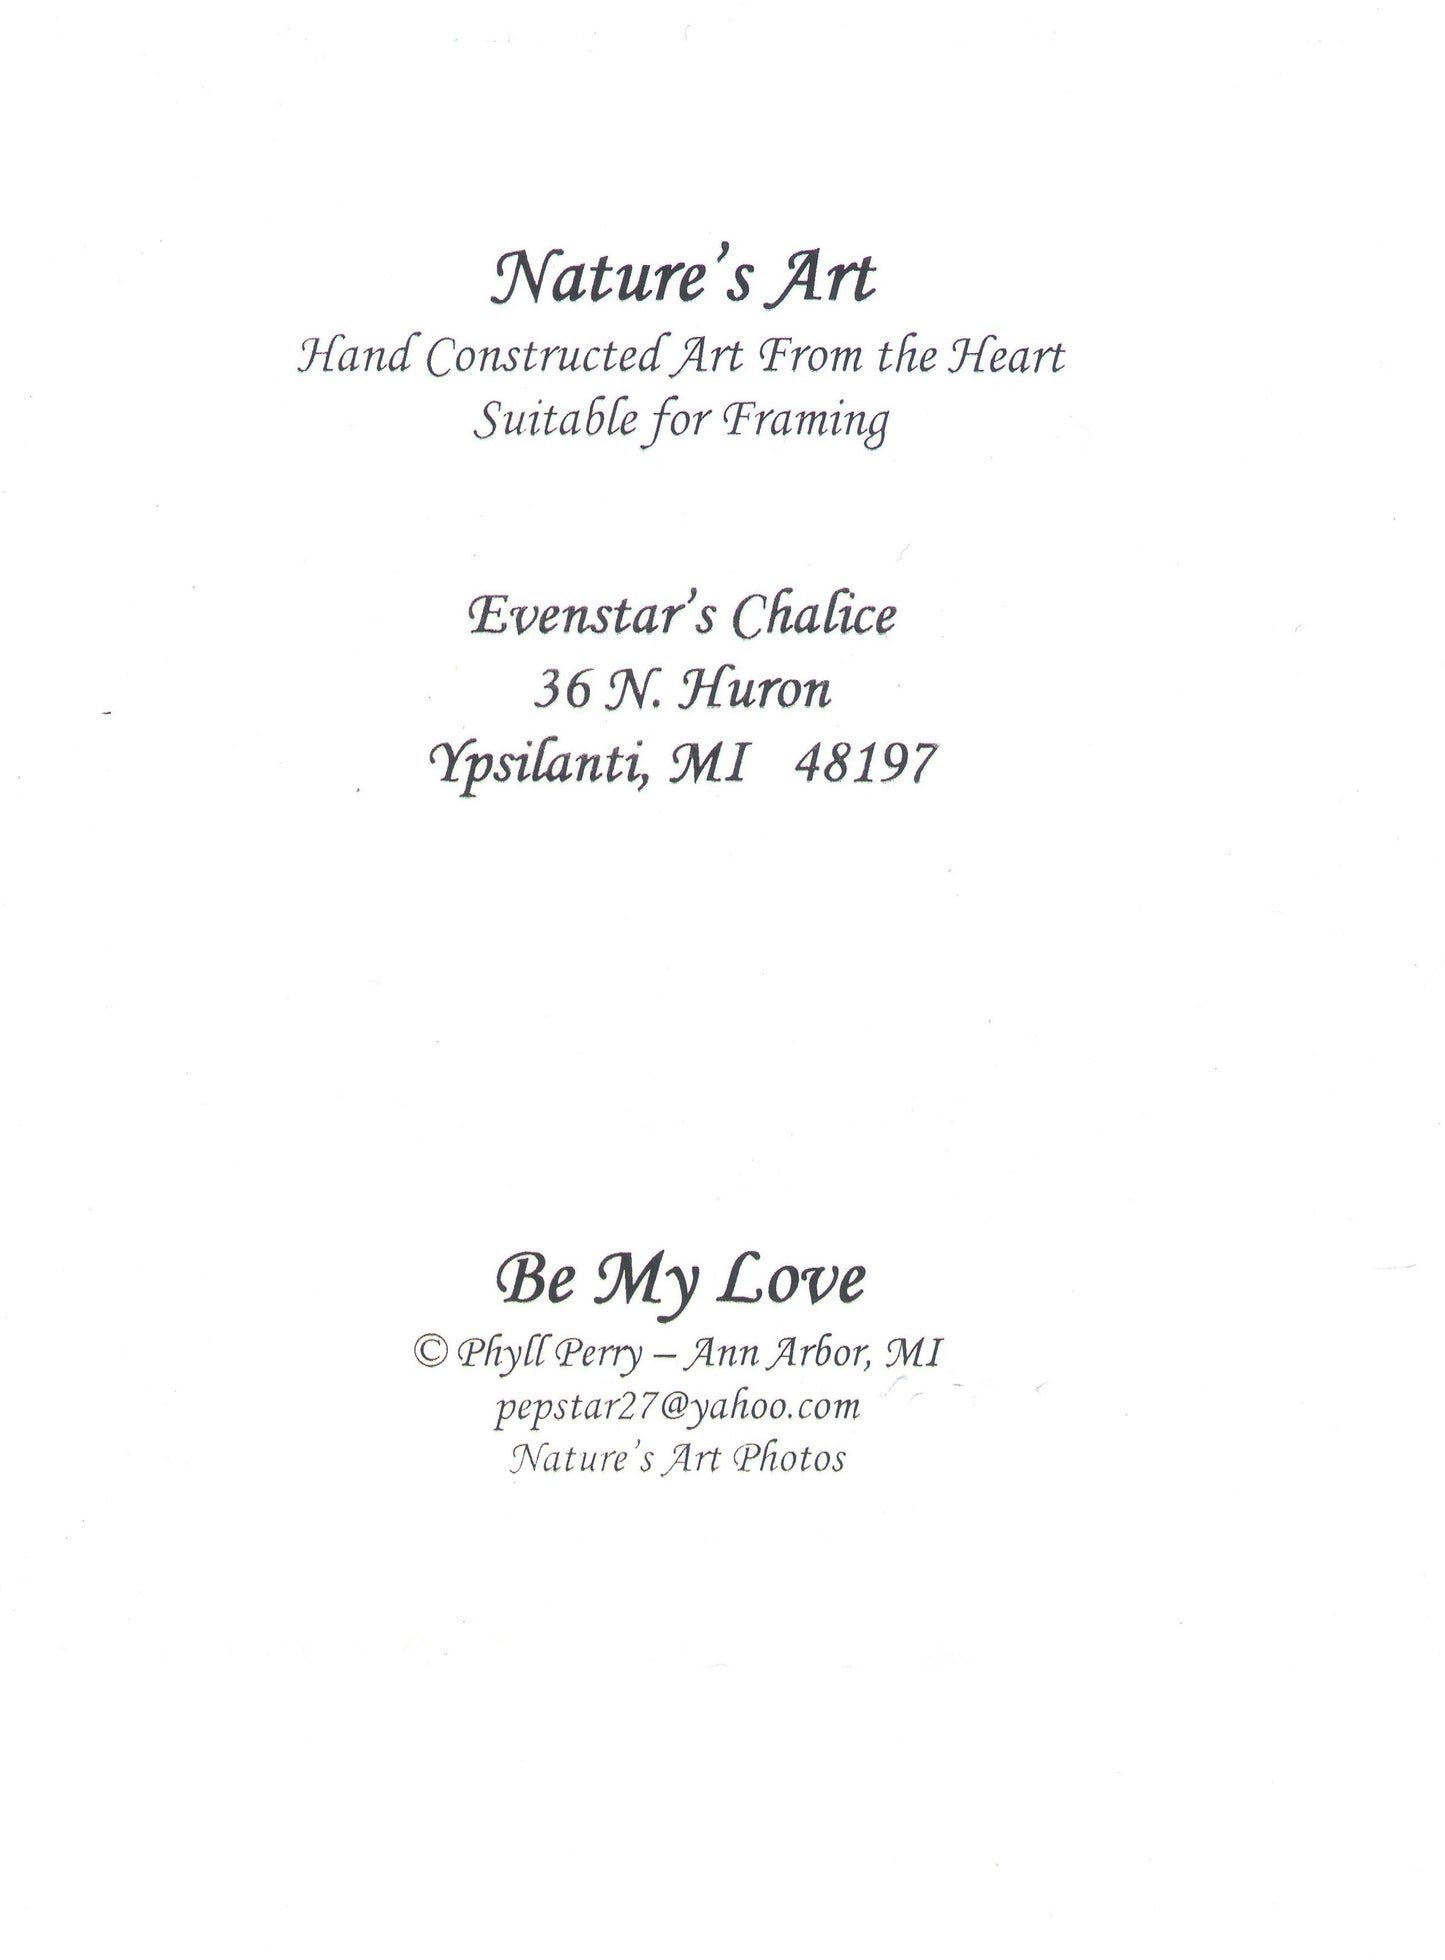 "Be My Love" greeting card by Nature's Art